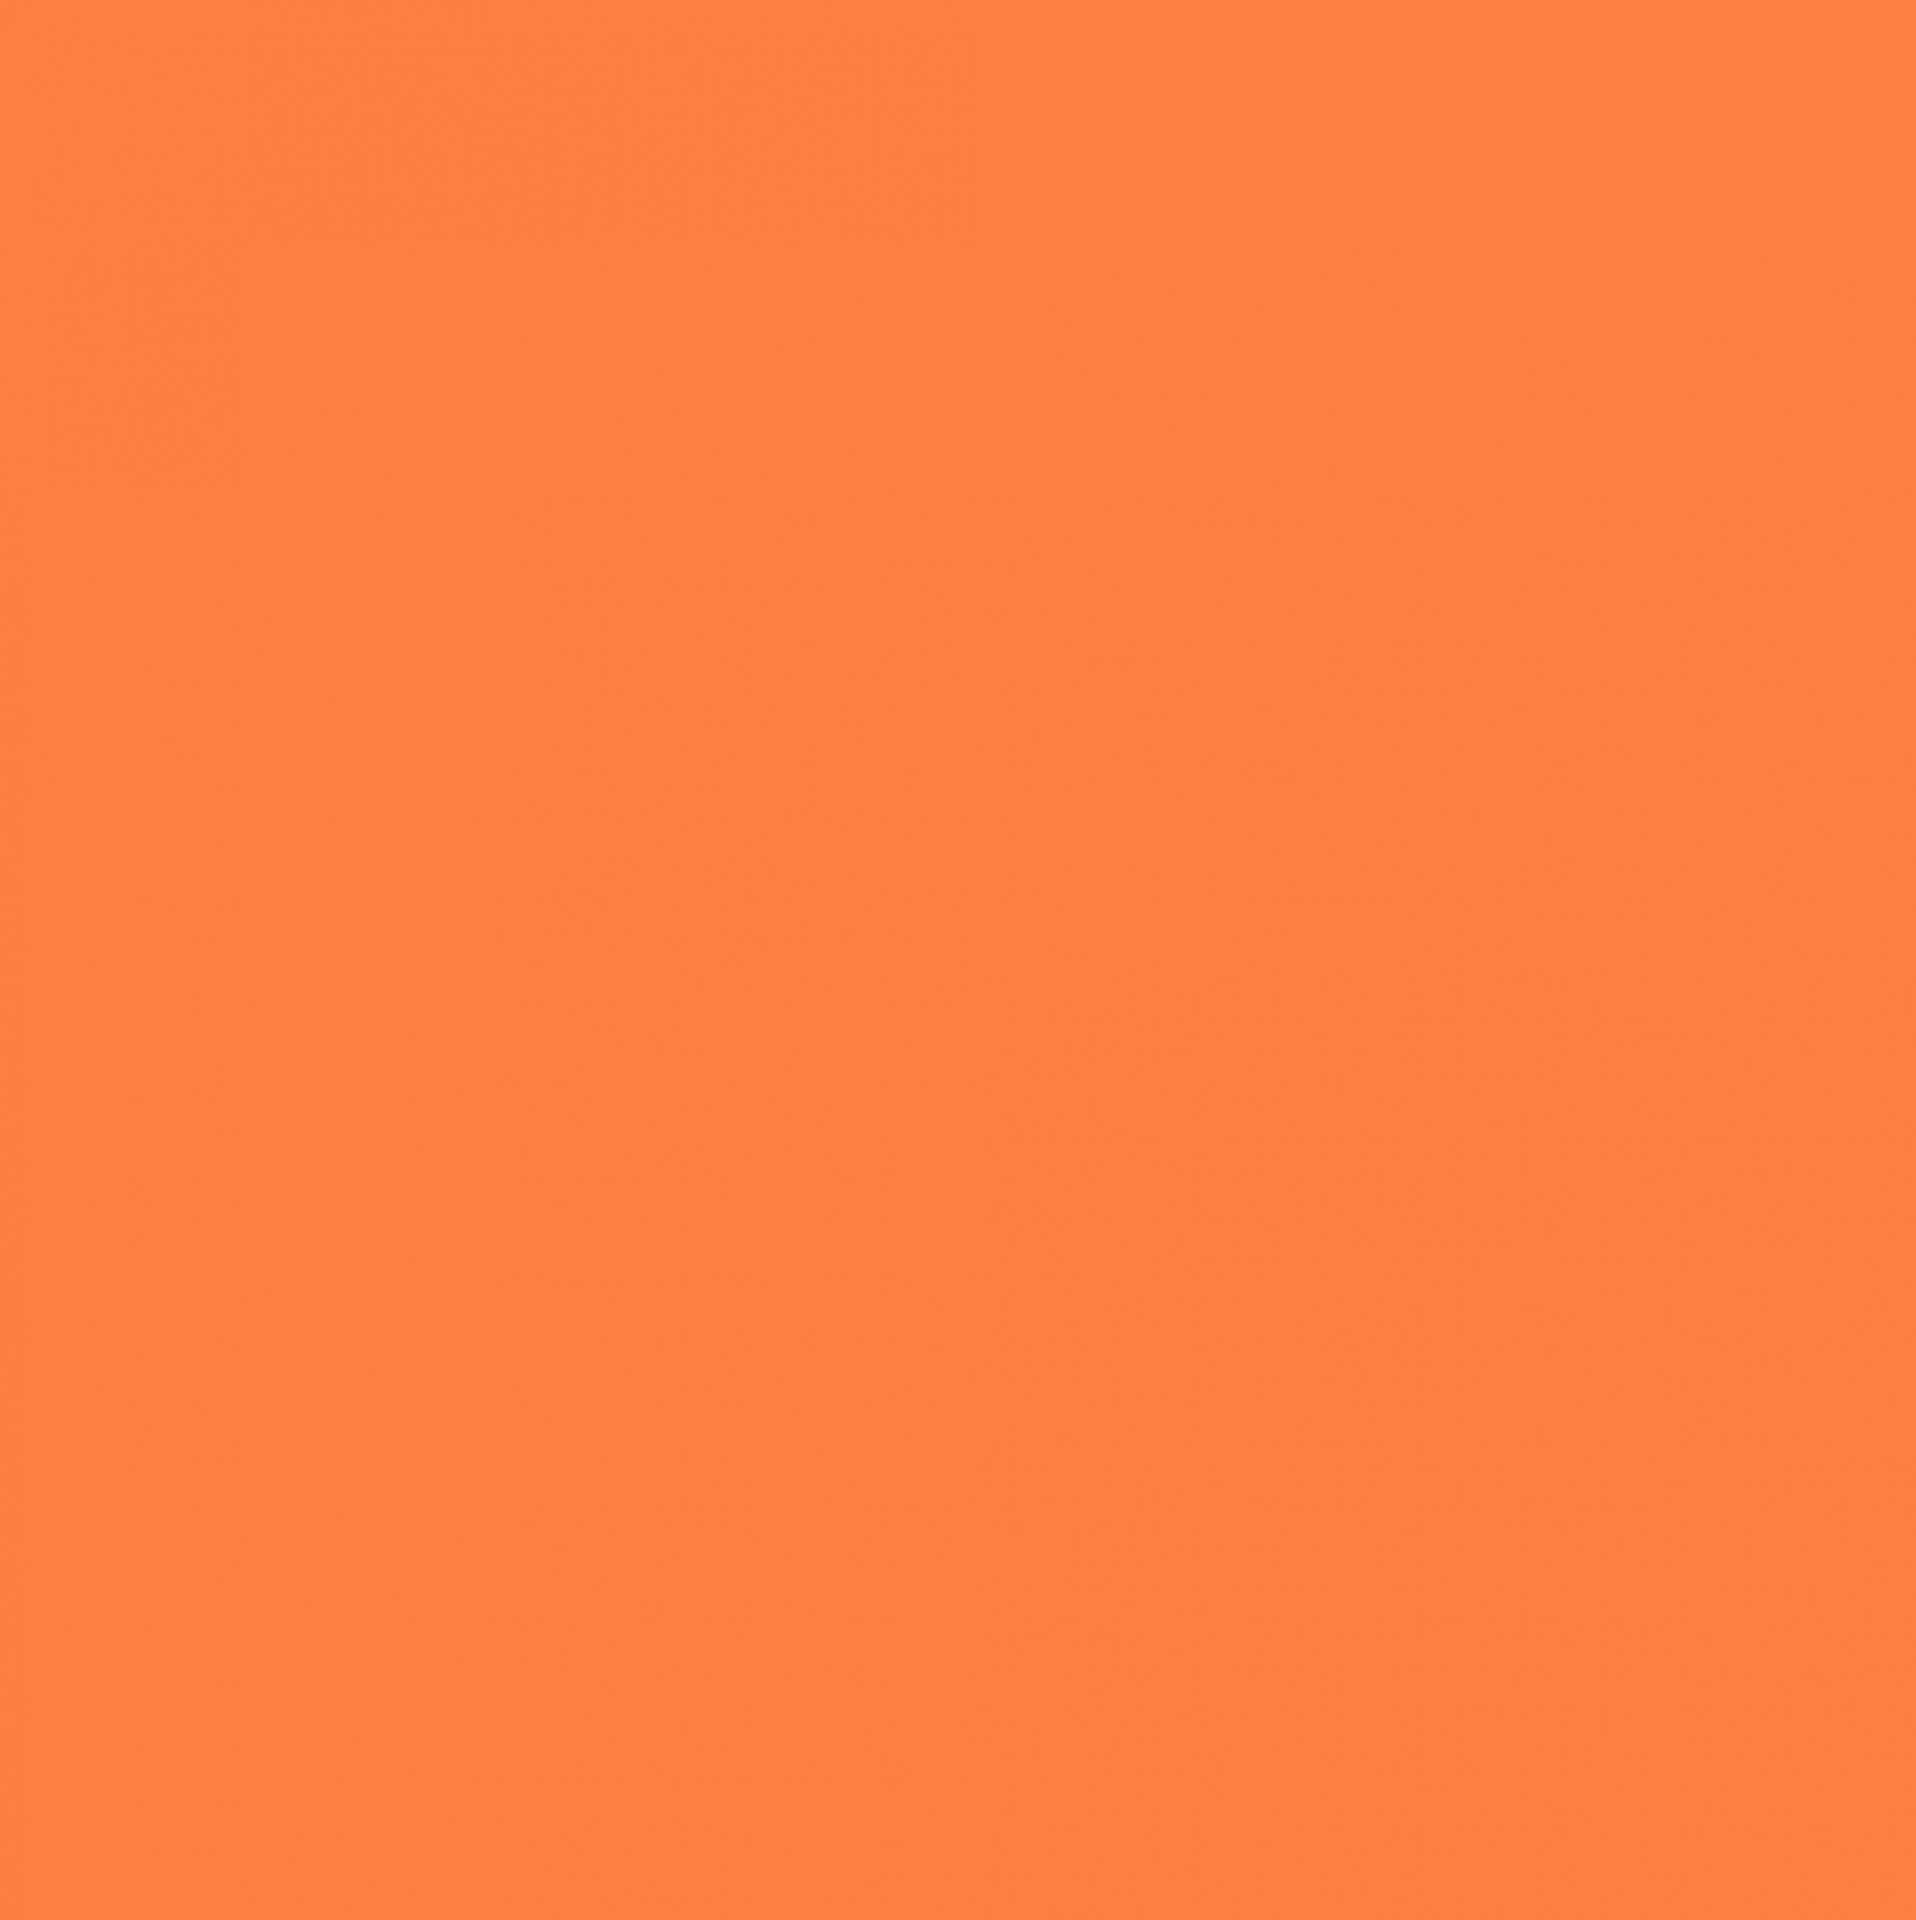 Orange white abstract background Vectors & Illustrations for Free Download  | Freepik